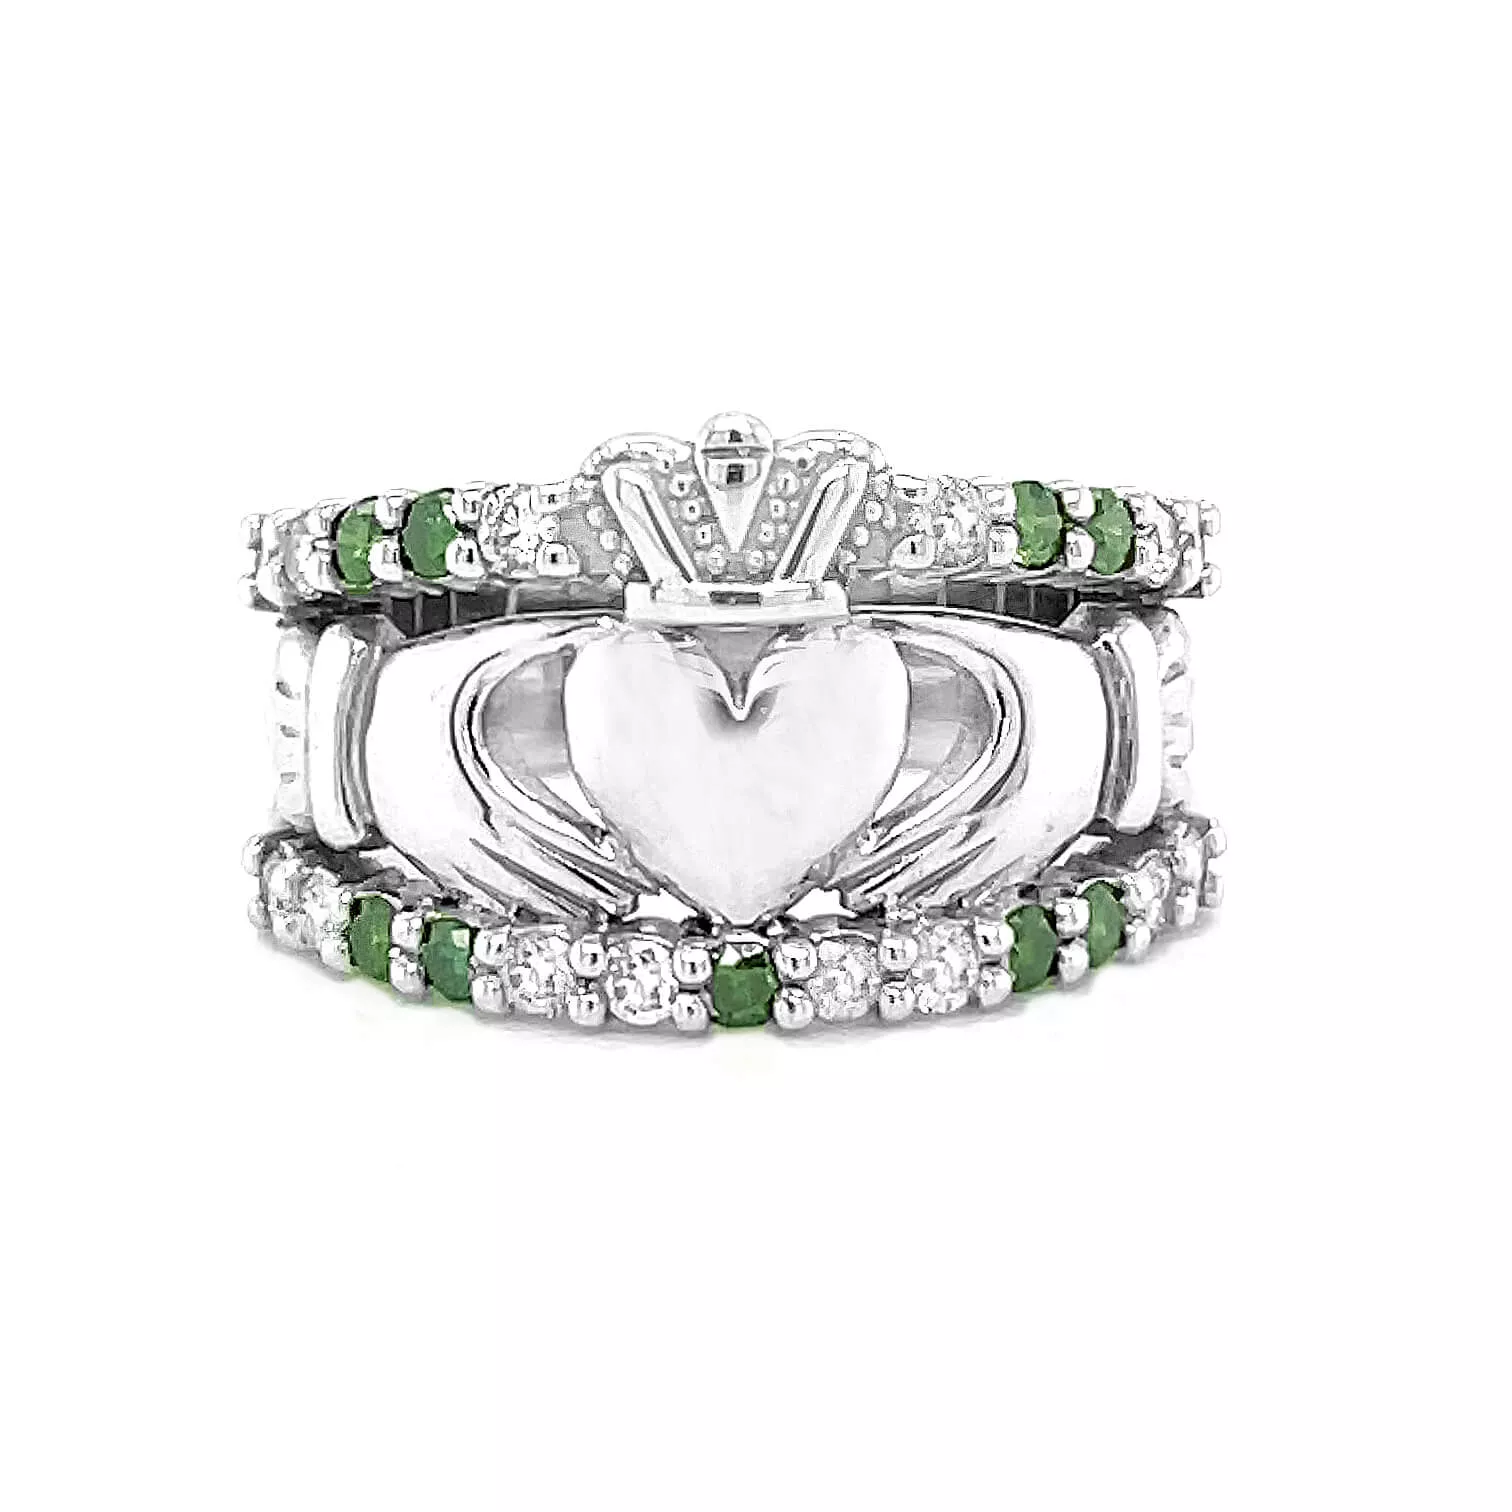 White Claddagh Ring With Green Coloured And White Diamonds 